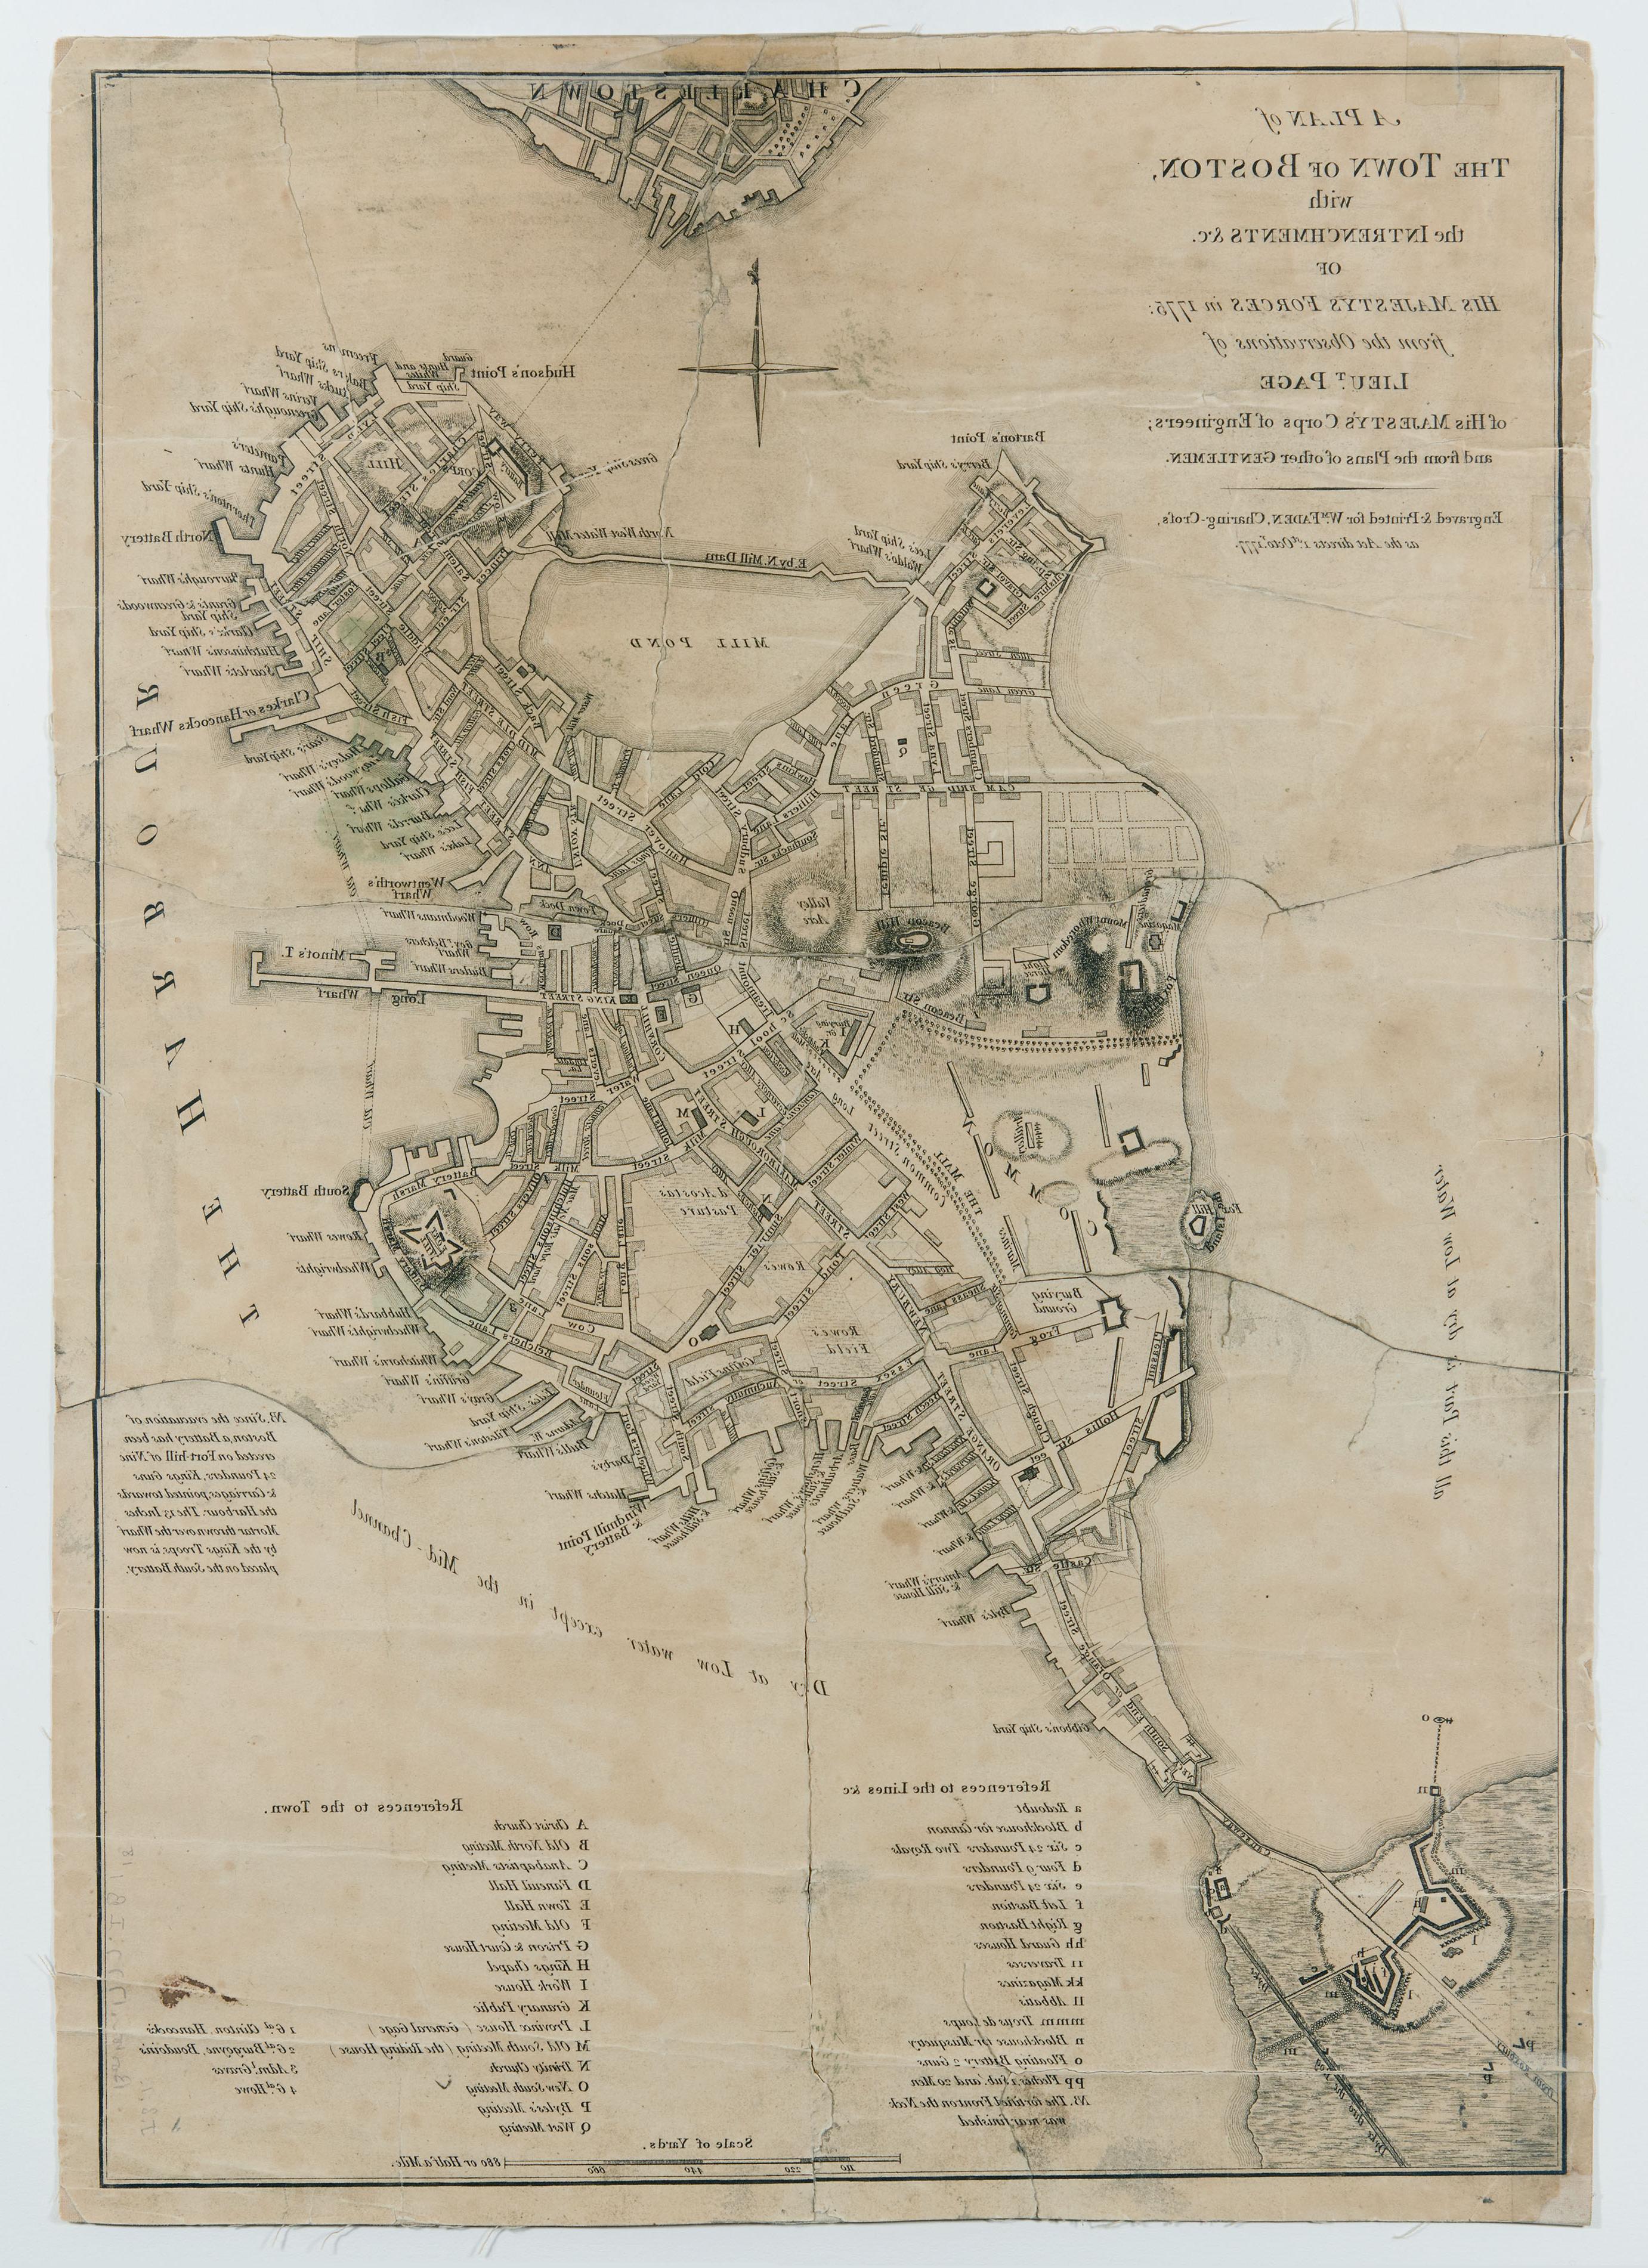 map of boston harbor depicted in black ink with streets and wharves labeled; around the harbor text reads "dry at low water"